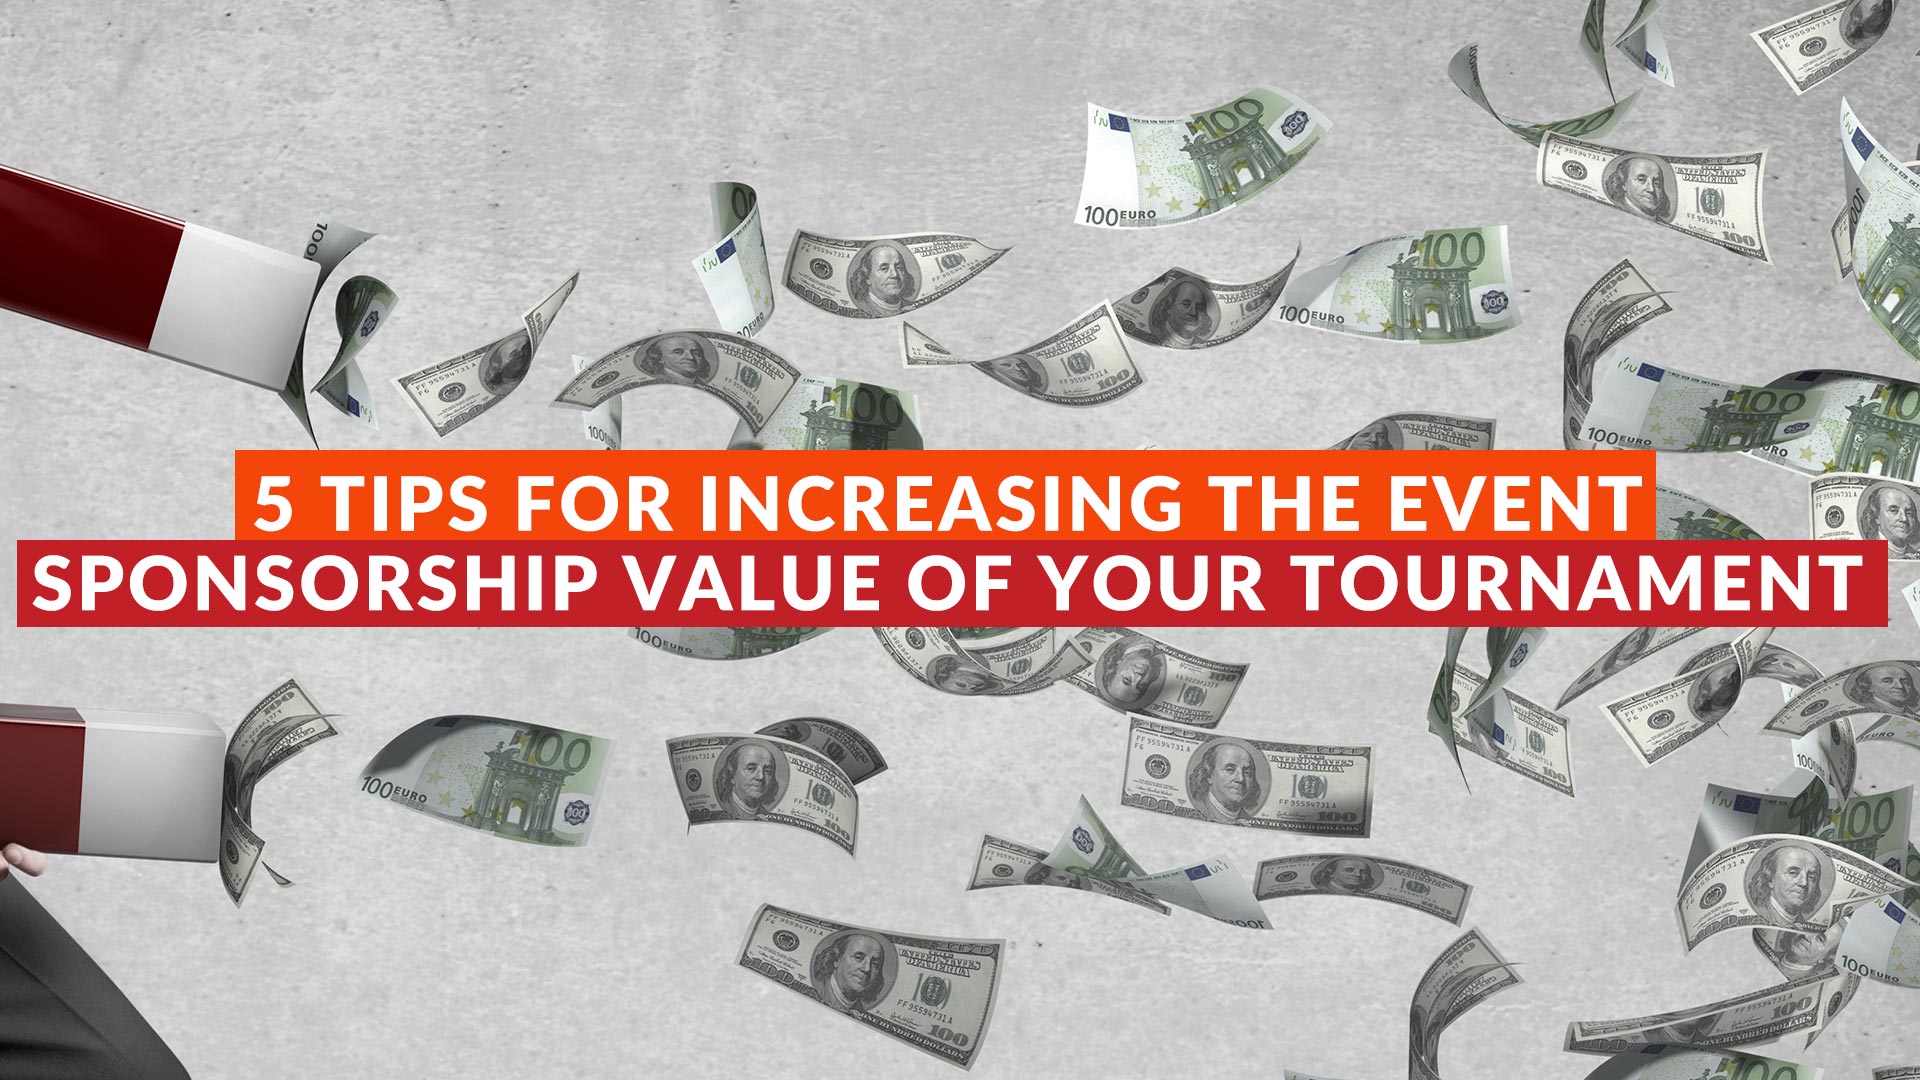 5 Tips for Increasing the Event Sponsorship Value of your Tournament